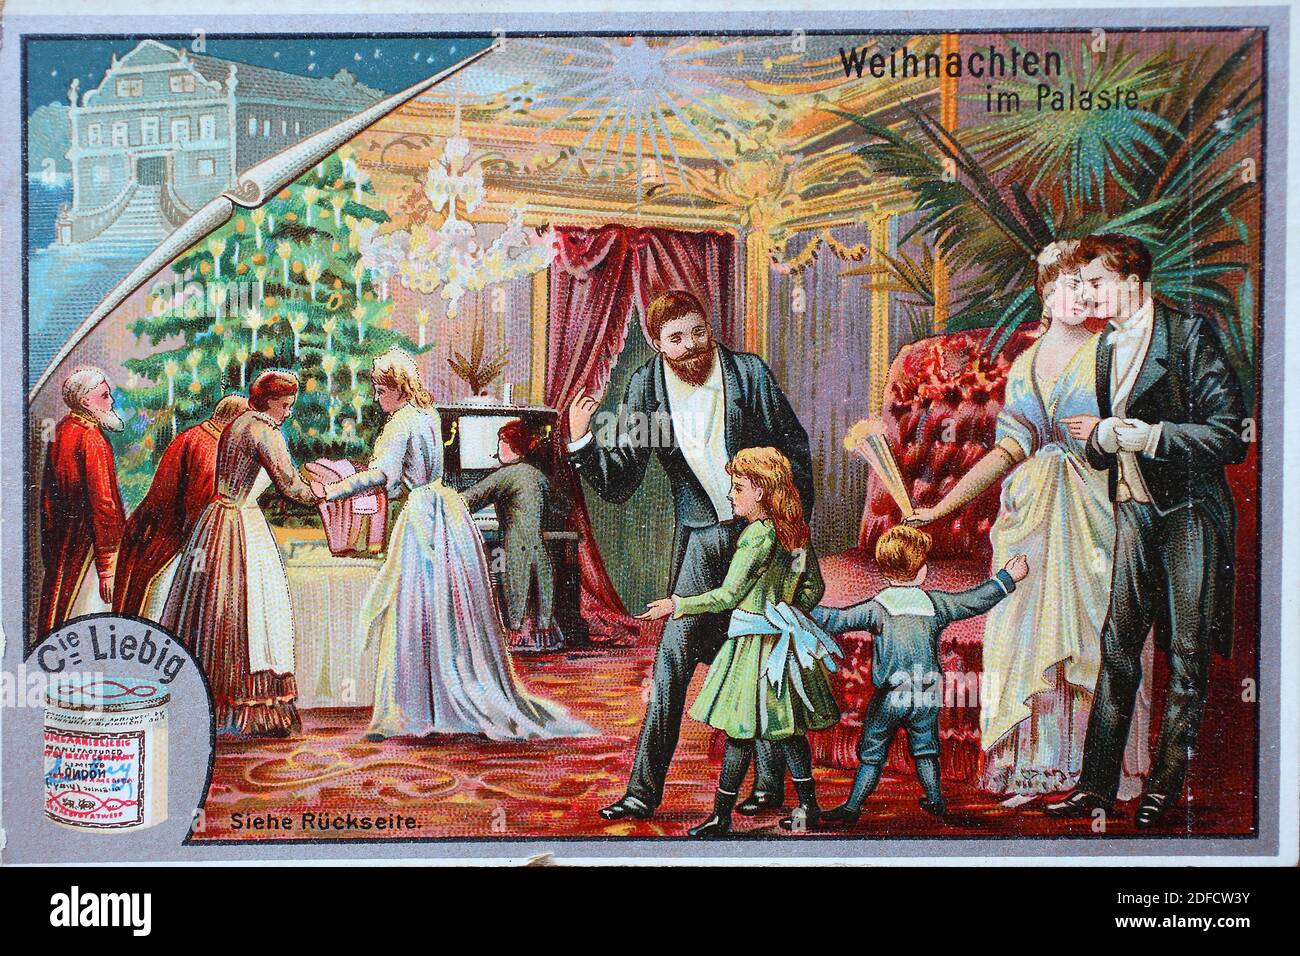 Picture series Christmas, Christmas at the palace  /  Bildserie Weihnachtsfest, Weihnachten im Palast, Liebigbild, digital improved reproduction of a collectible image from the Liebig company, estimated from 1900, pd  /  digital verbesserte Reproduktion eines Sammelbildes von ca 1900, gemeinfrei, Stock Photo